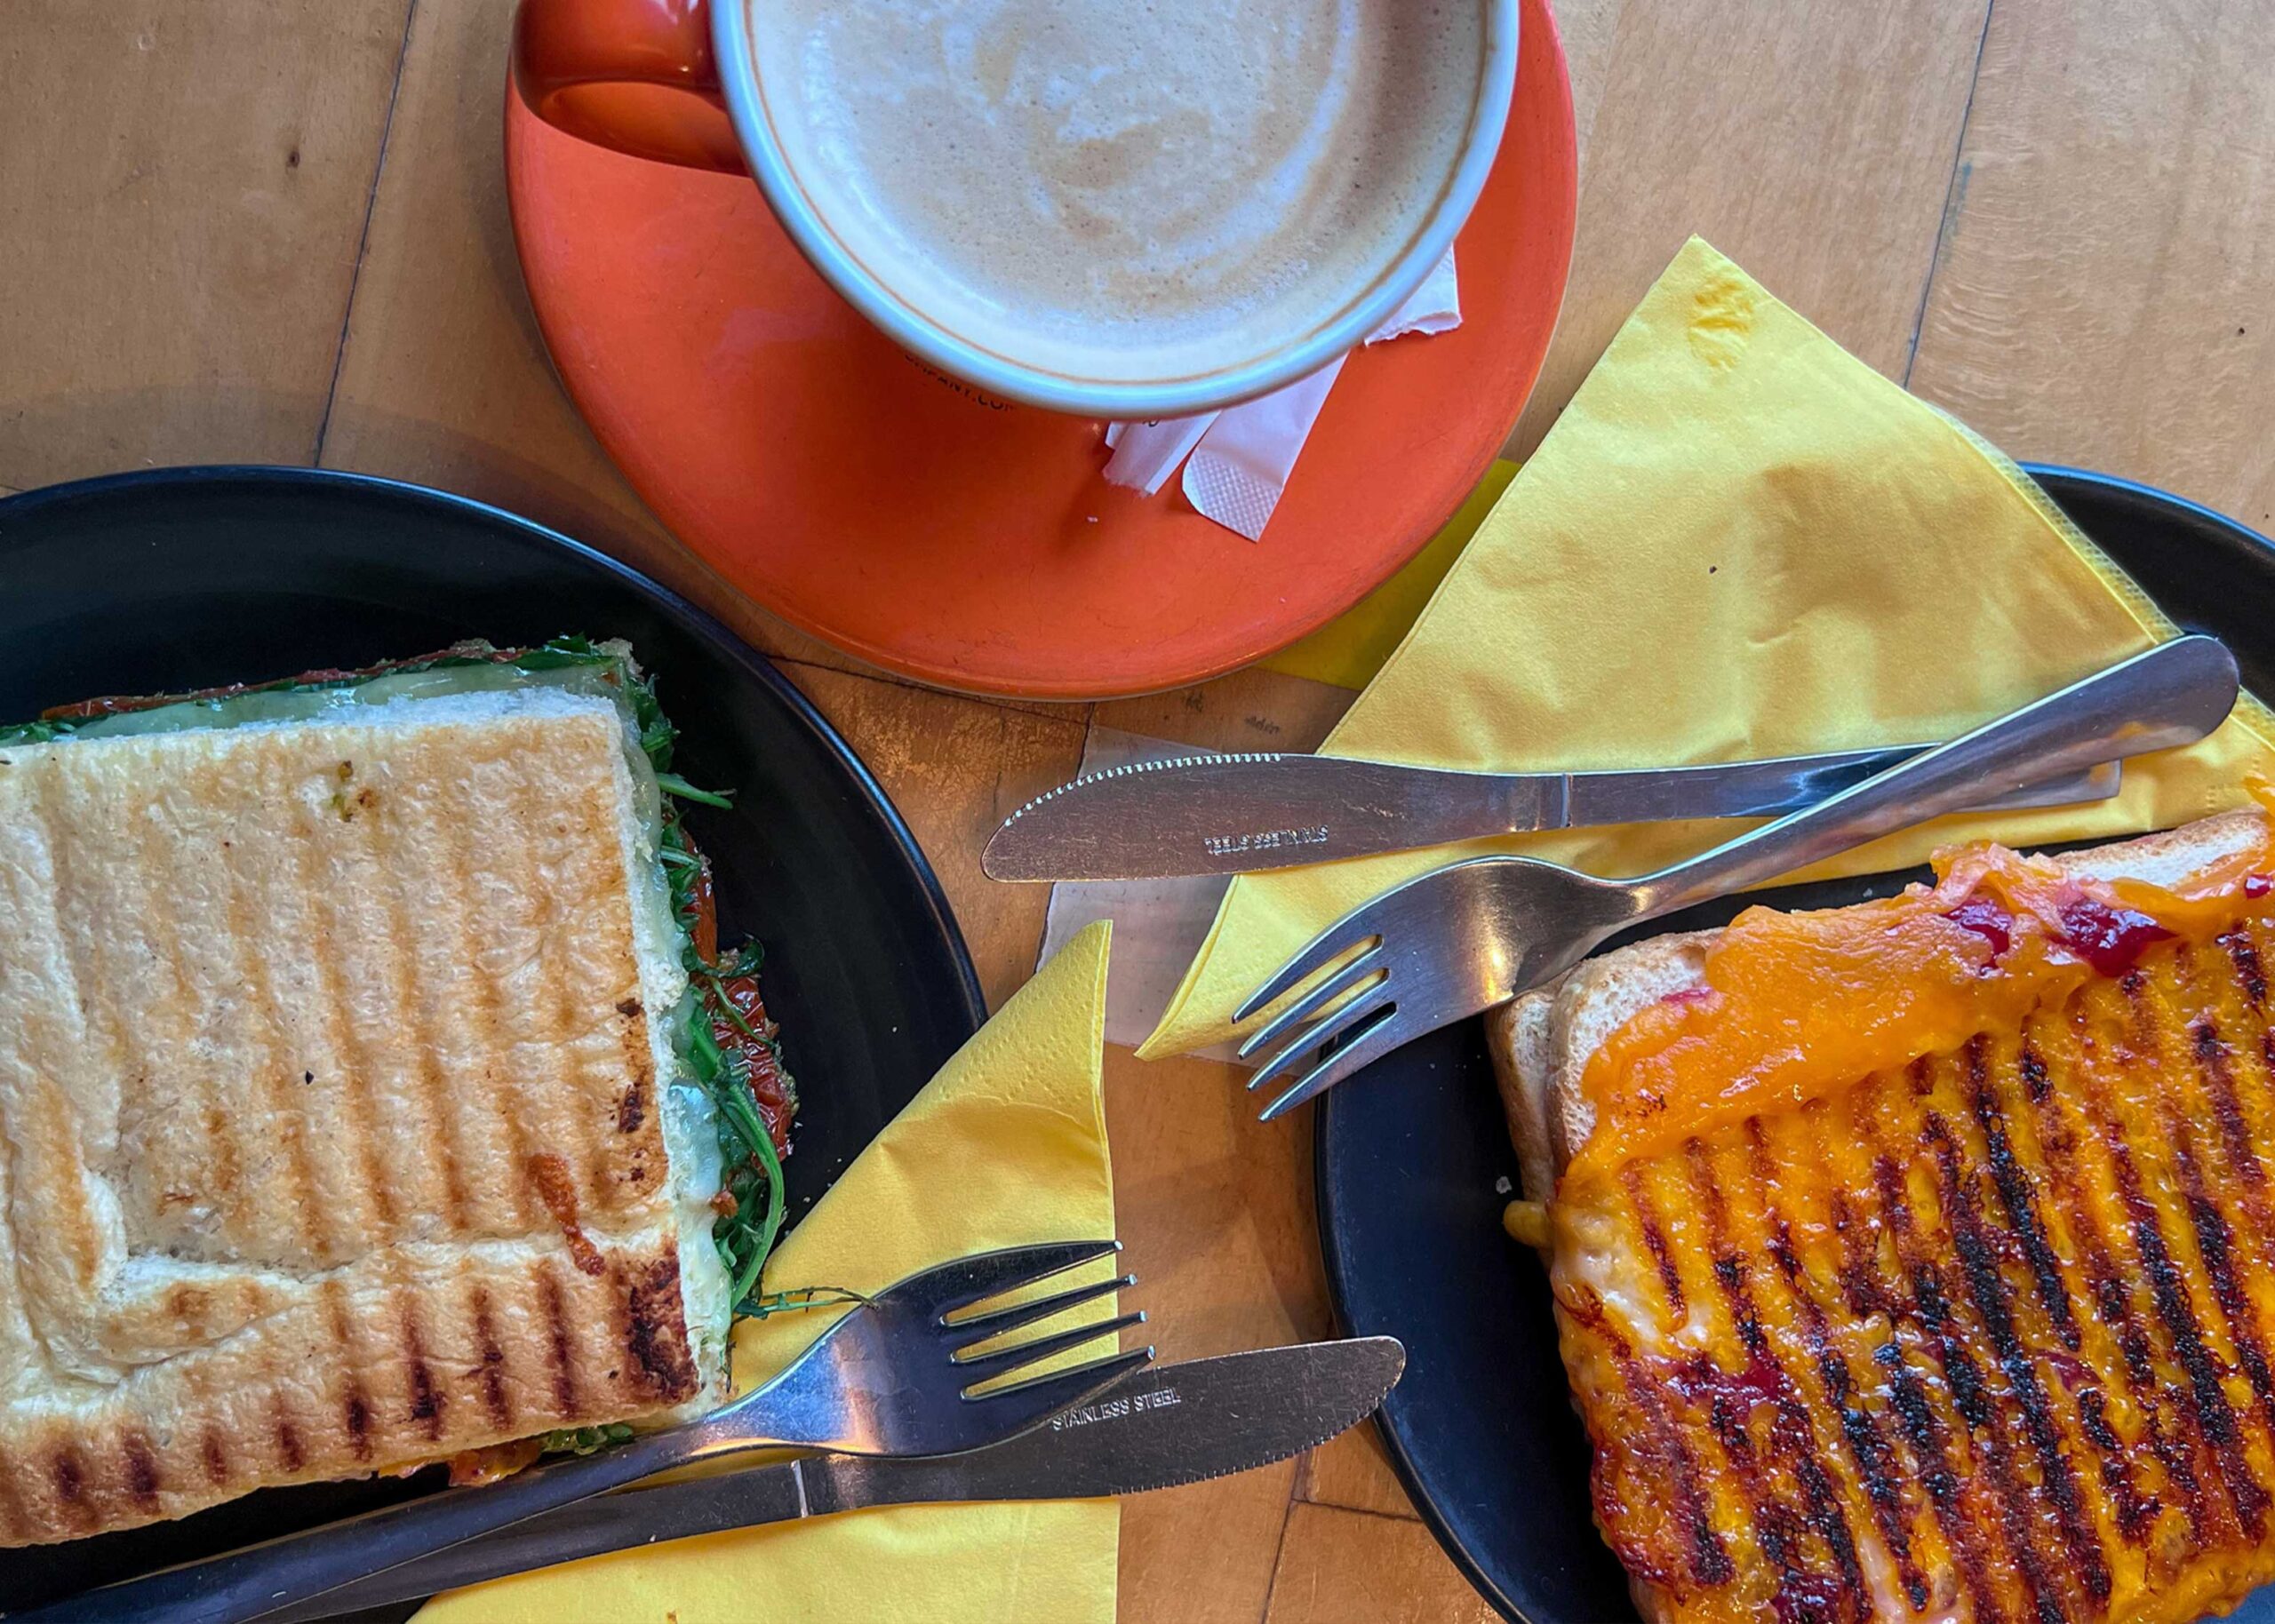 Birds eye view of toasties and a latte from Manna House Bakery